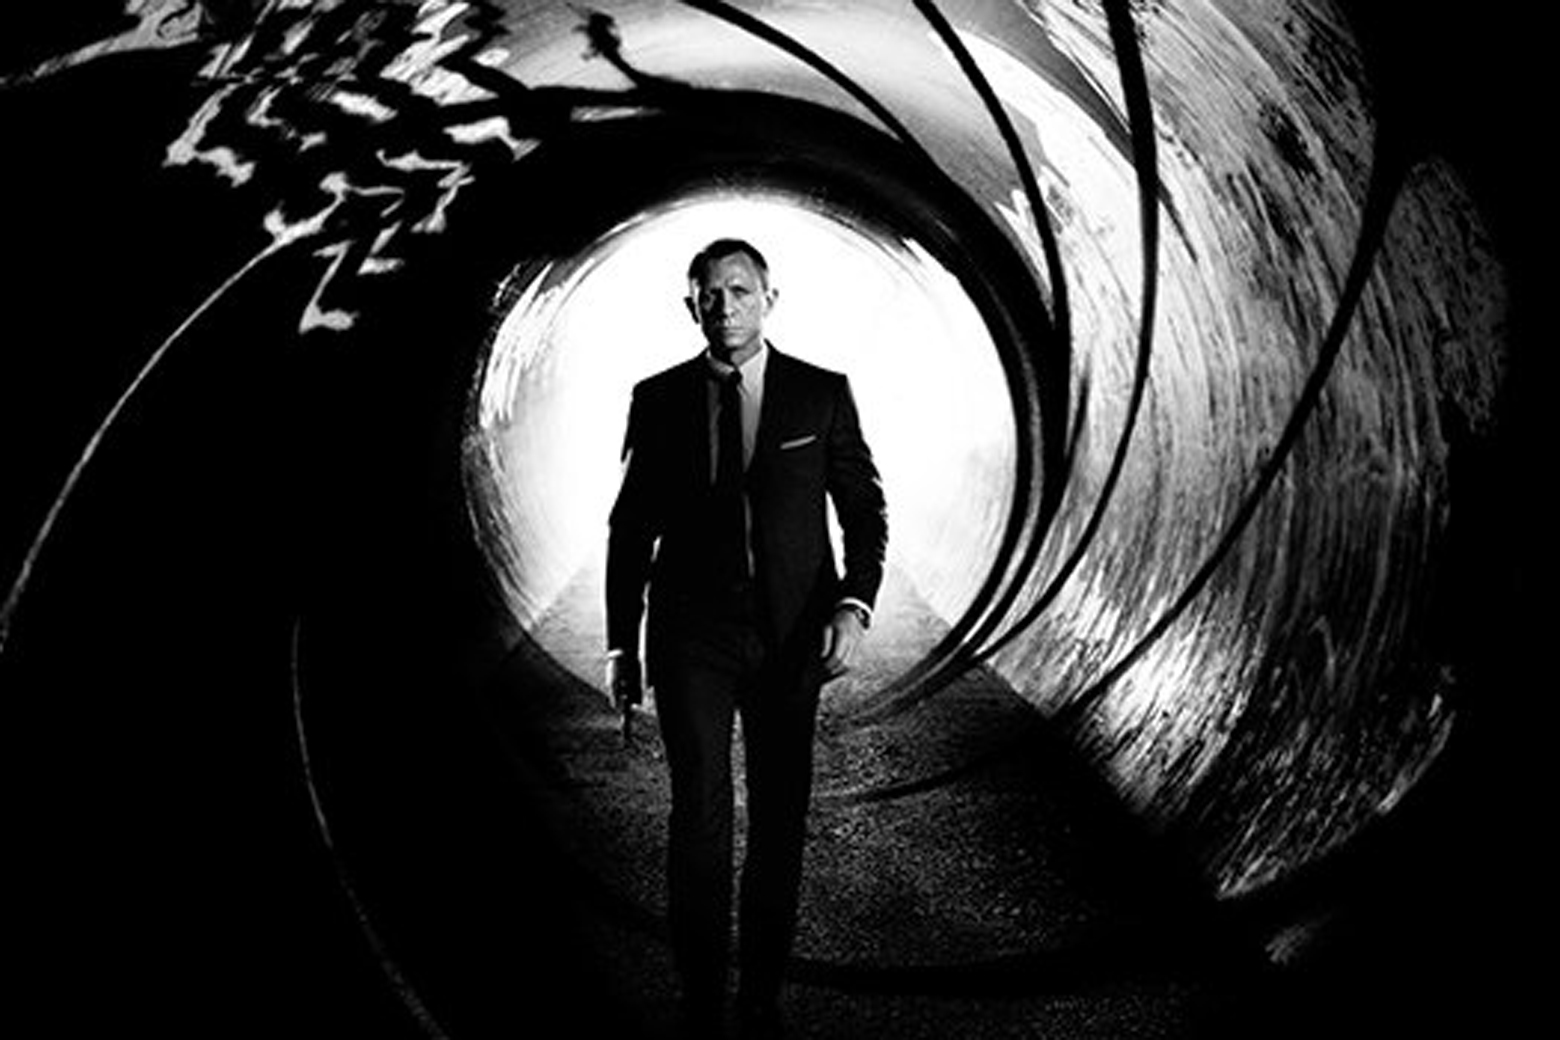 Countdown to 007 'Spectre': Ranking the Best of Bond